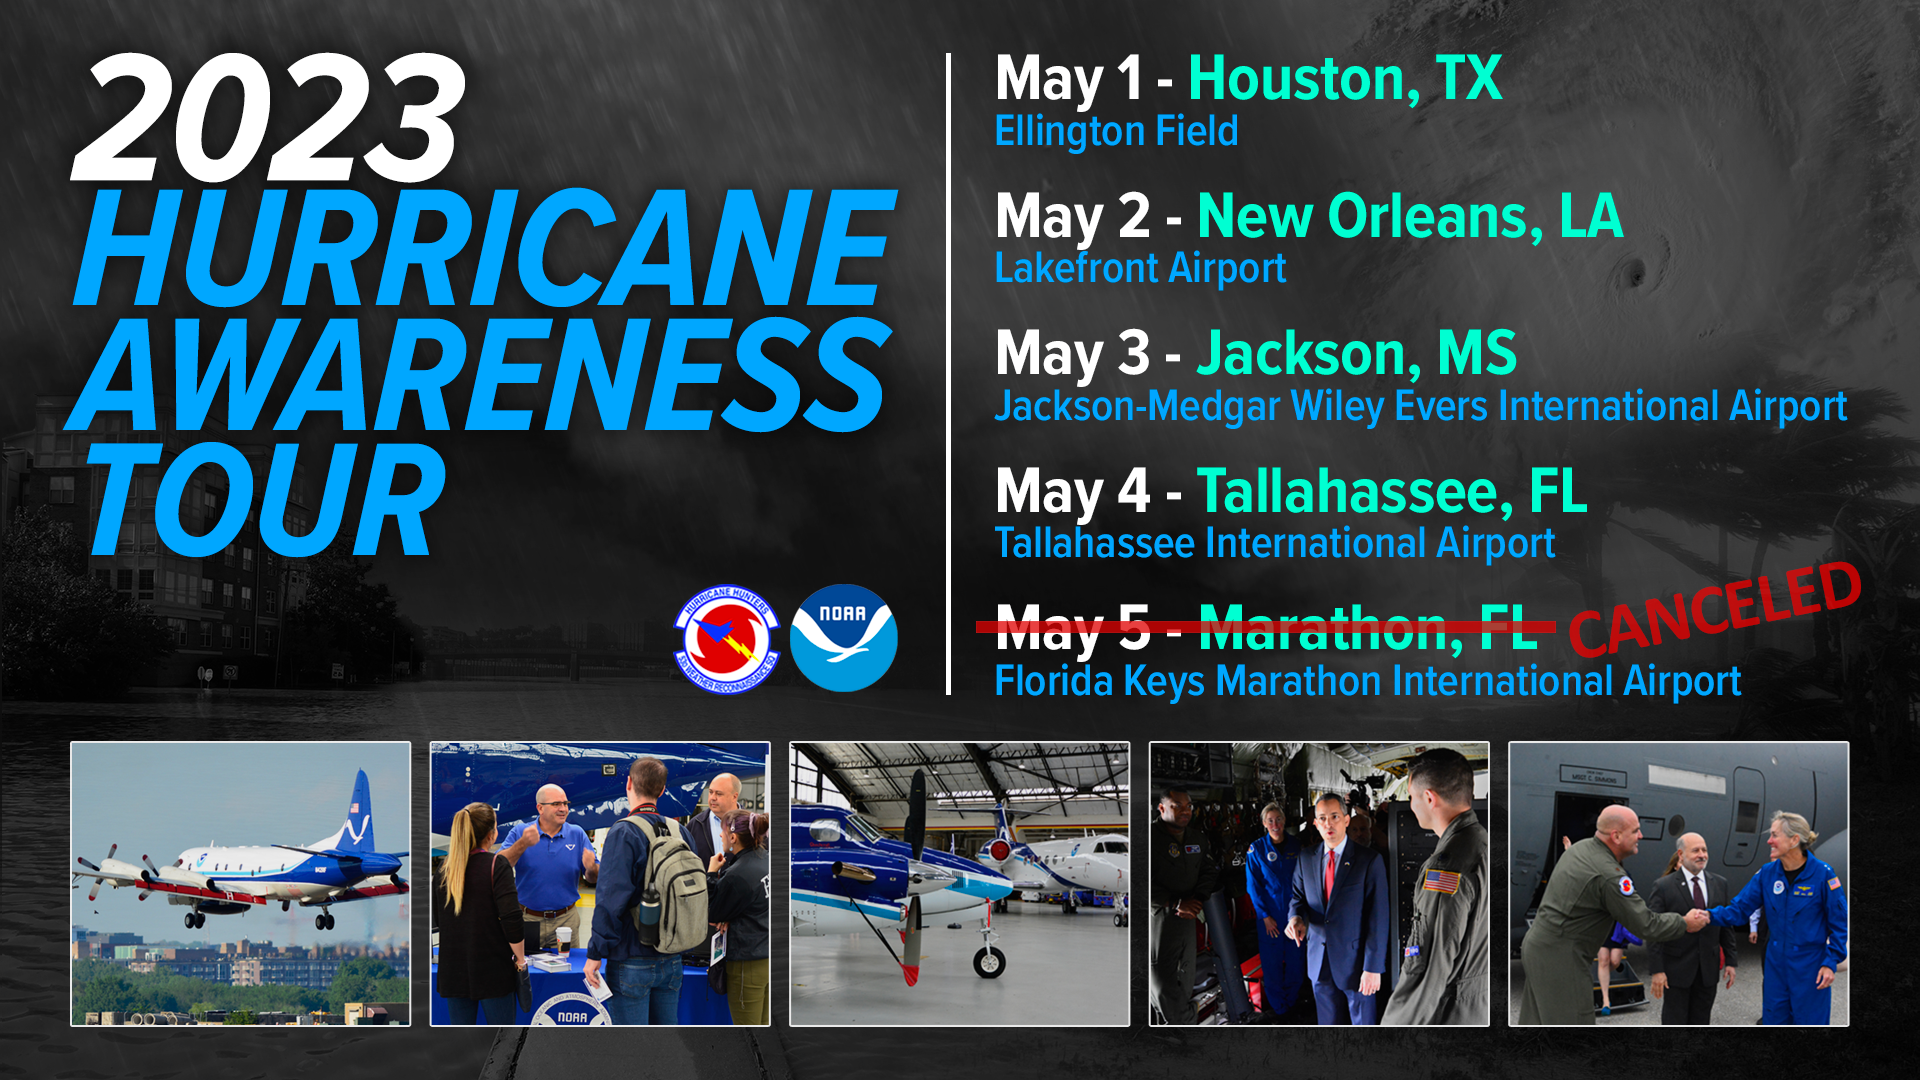 Hurricane Awareness Tours National Oceanic and Atmospheric Administration